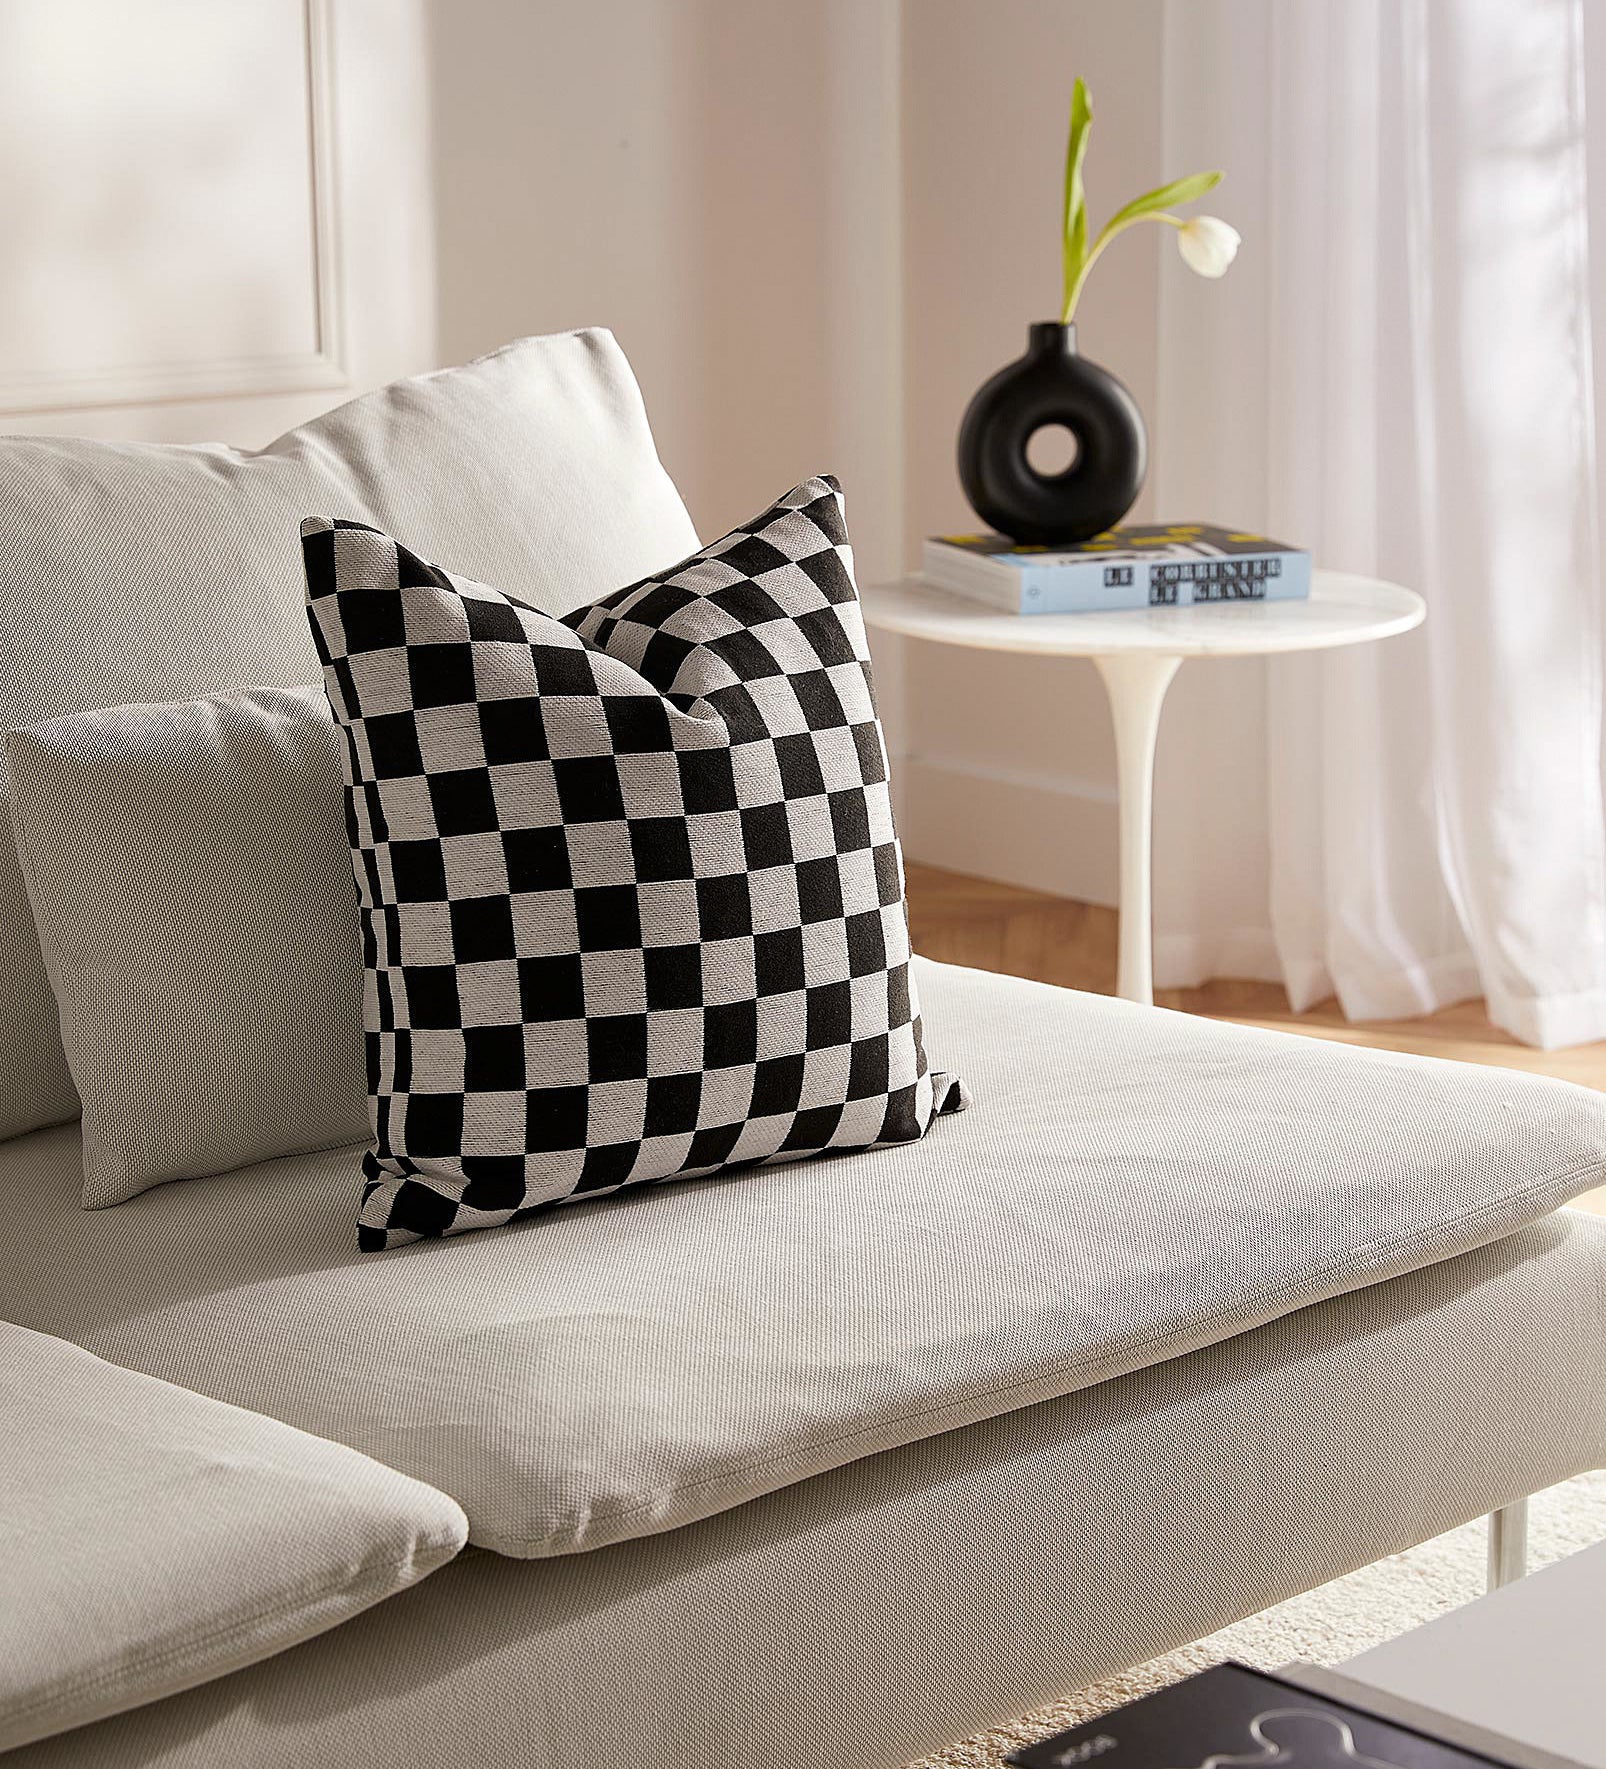 the checkered pillow on a couch